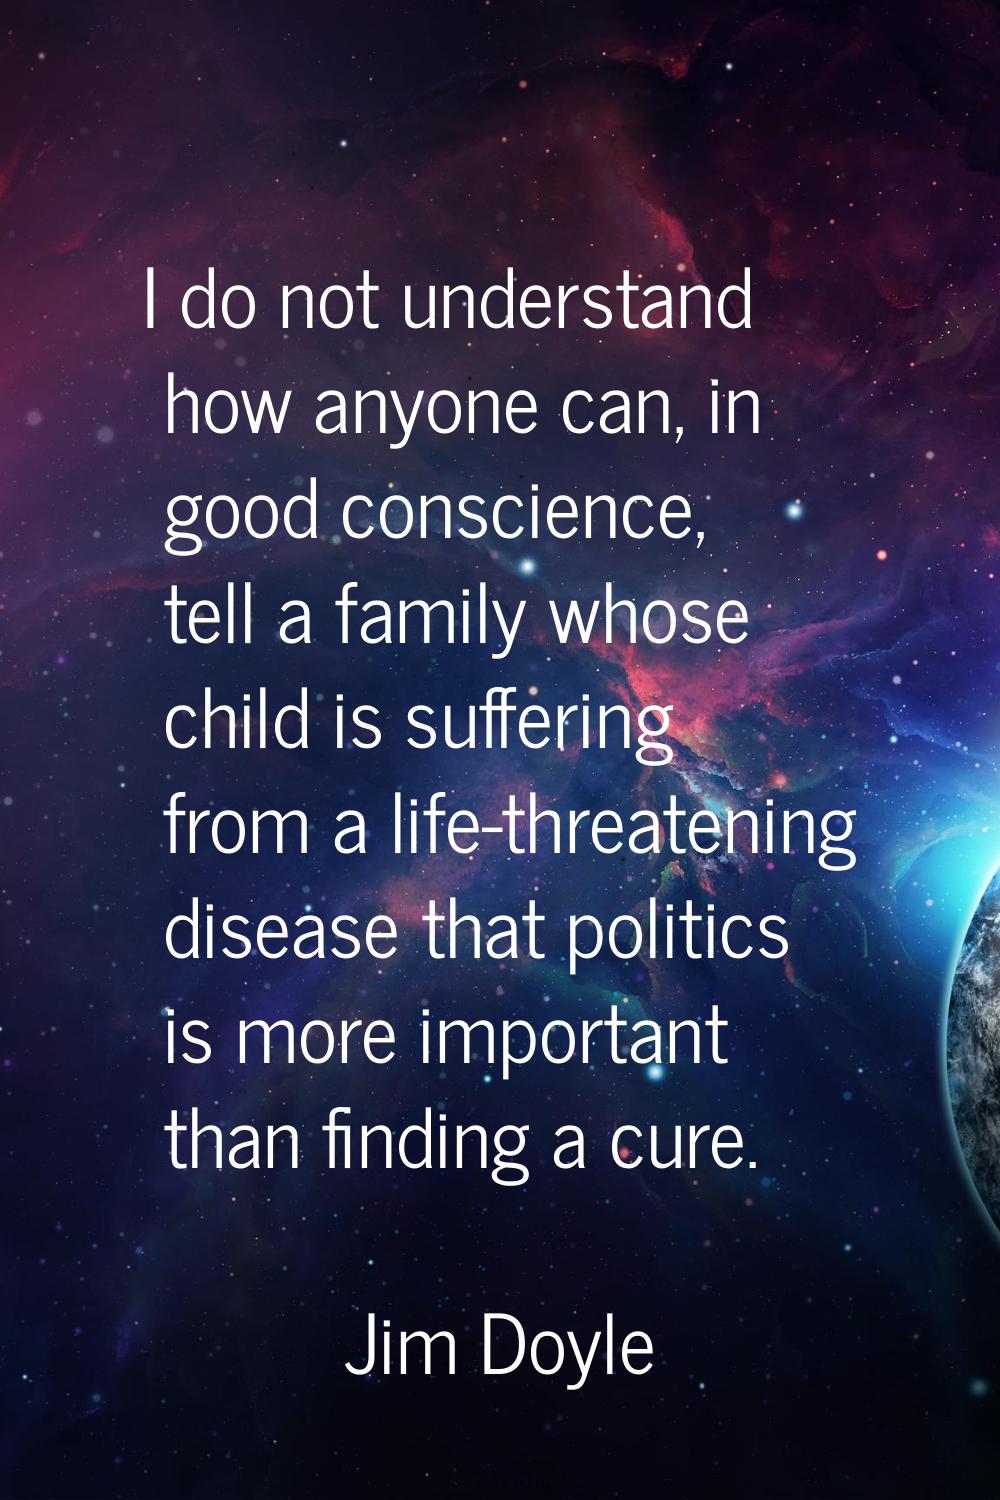 I do not understand how anyone can, in good conscience, tell a family whose child is suffering from